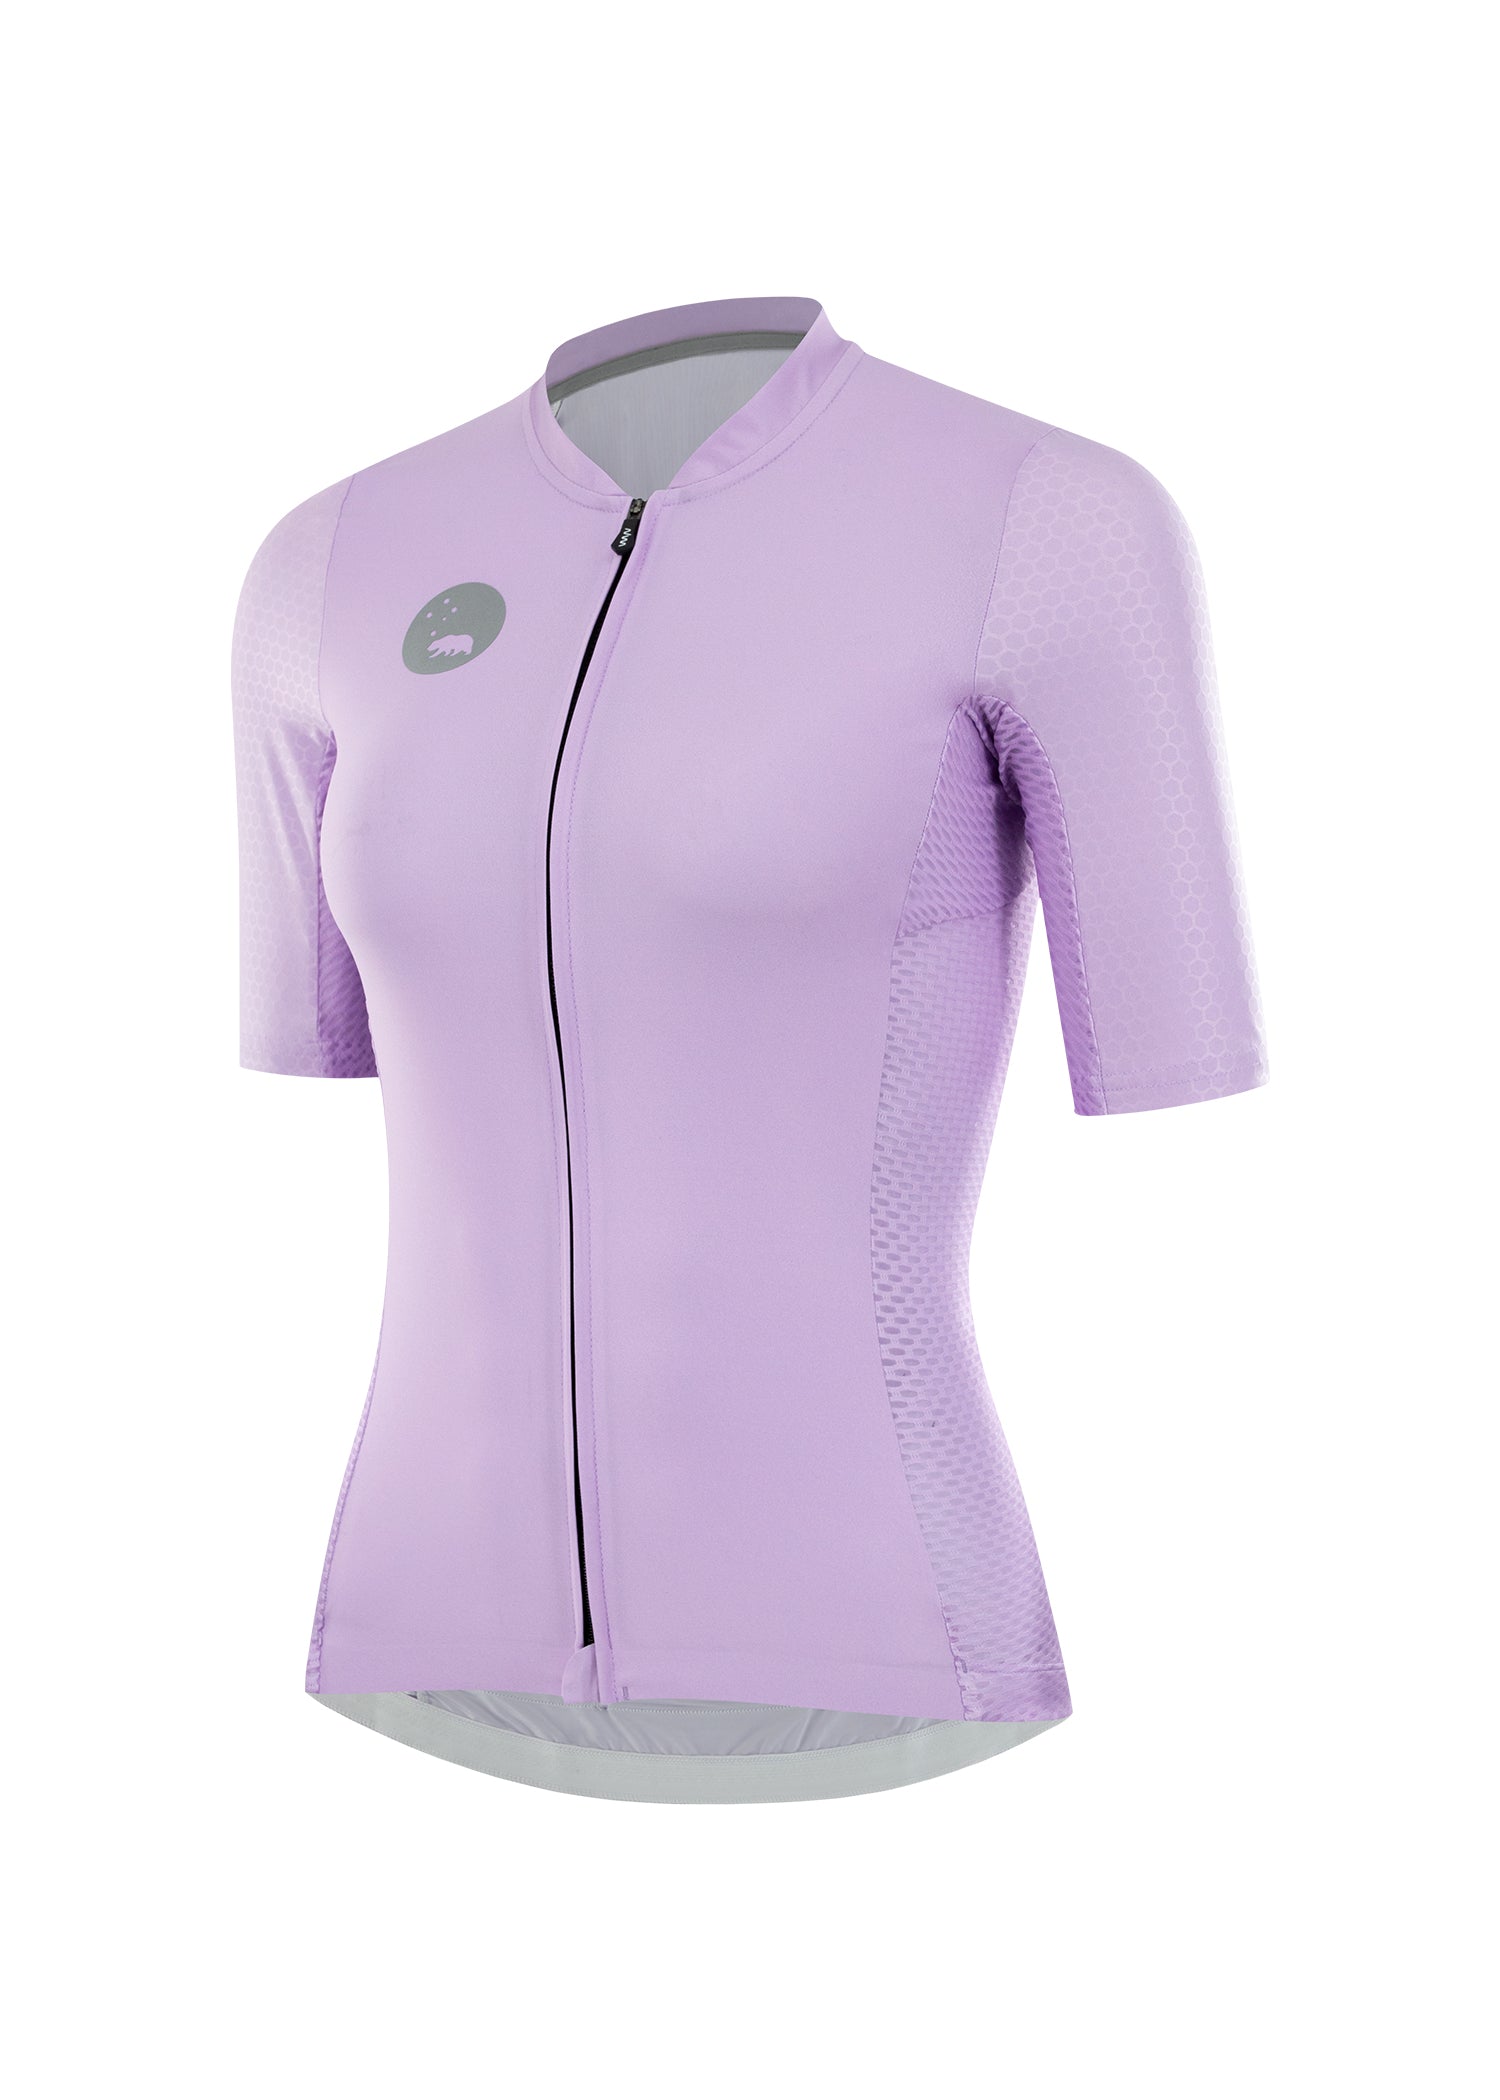 Women's LUCEO Hex Racer Cycling Jersey - Lavender